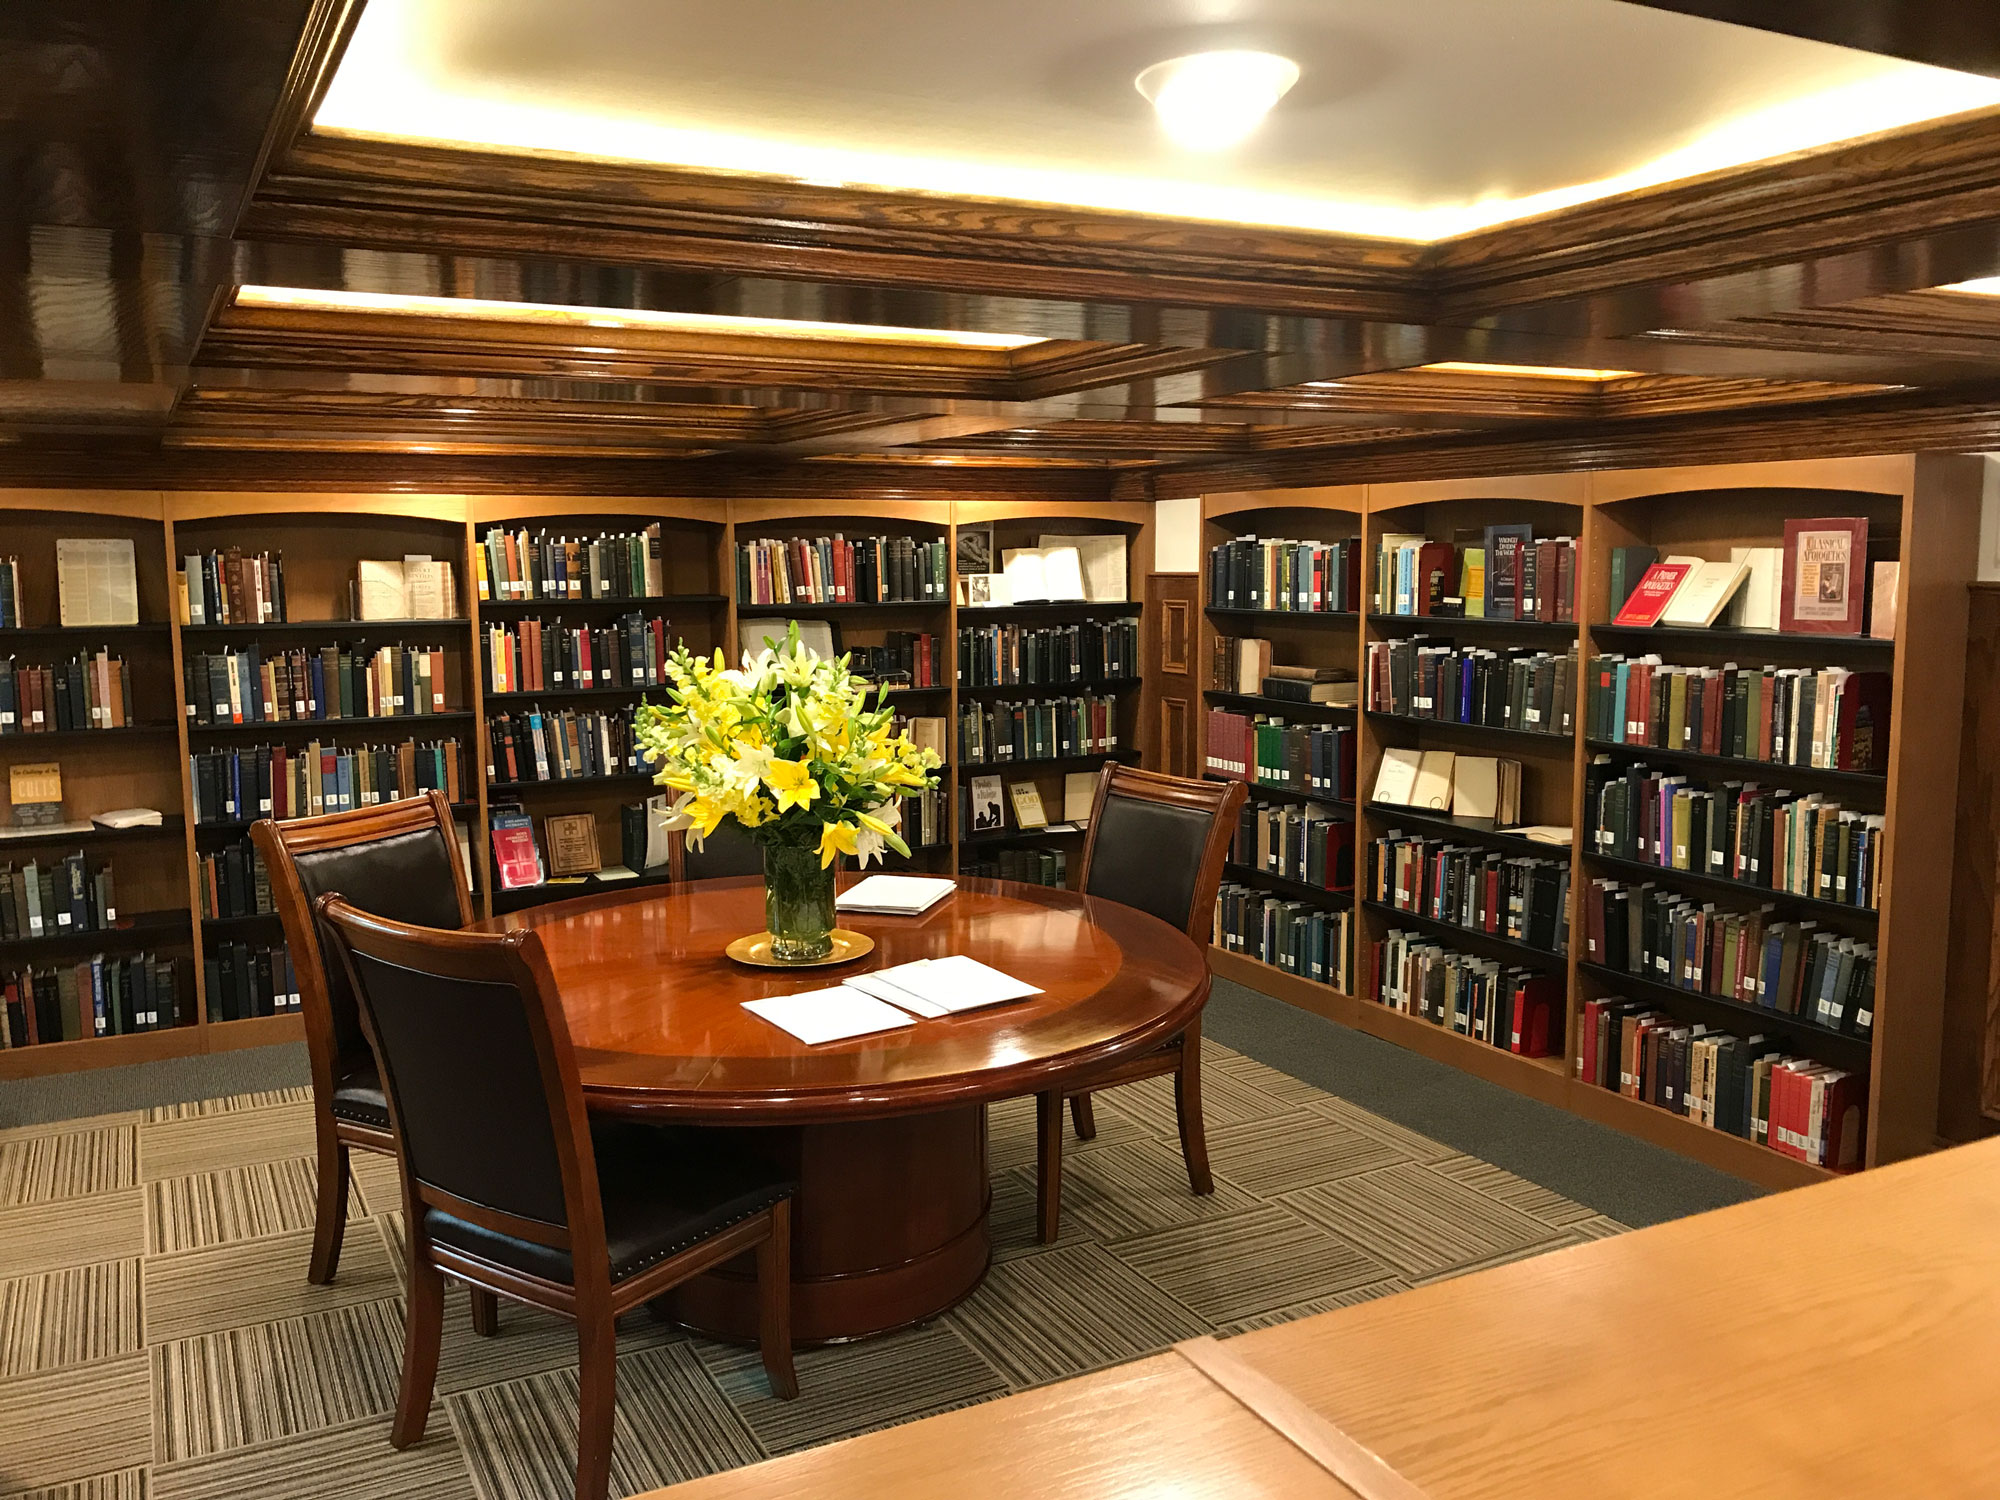 The Gerstner Collection Room at McCartney Library